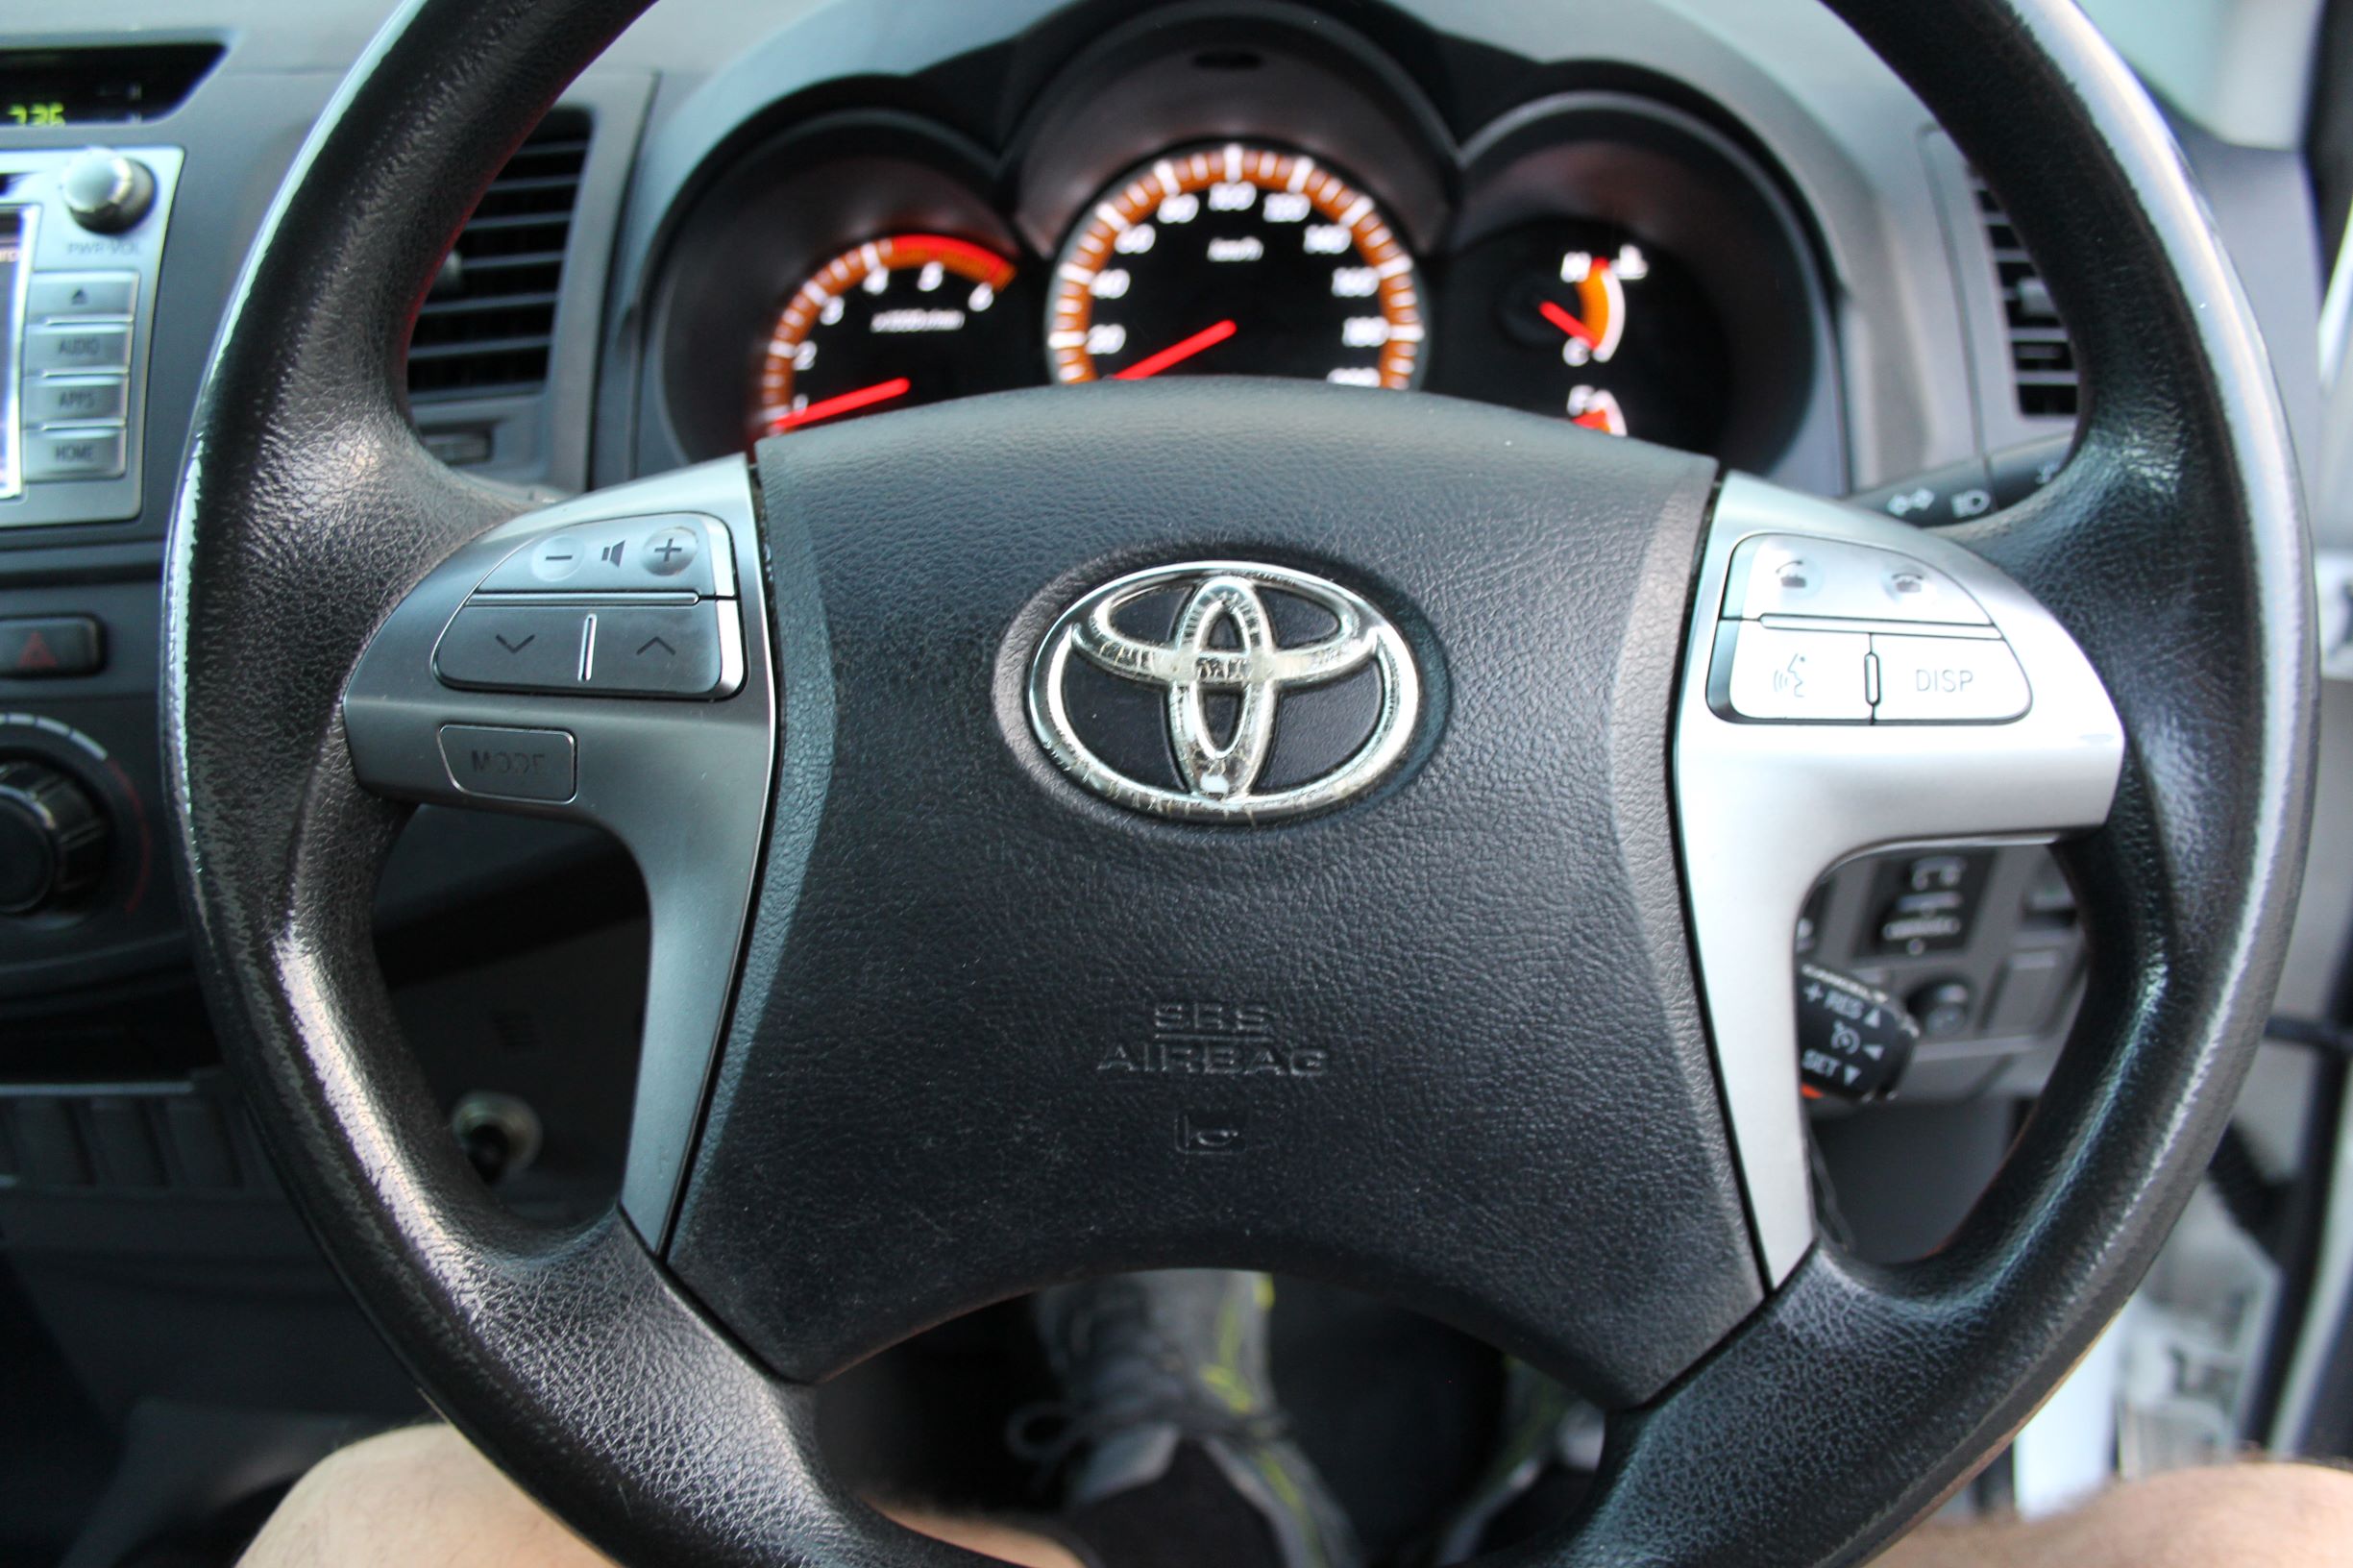 Toyota HILUX  2014 for sale in Auckland